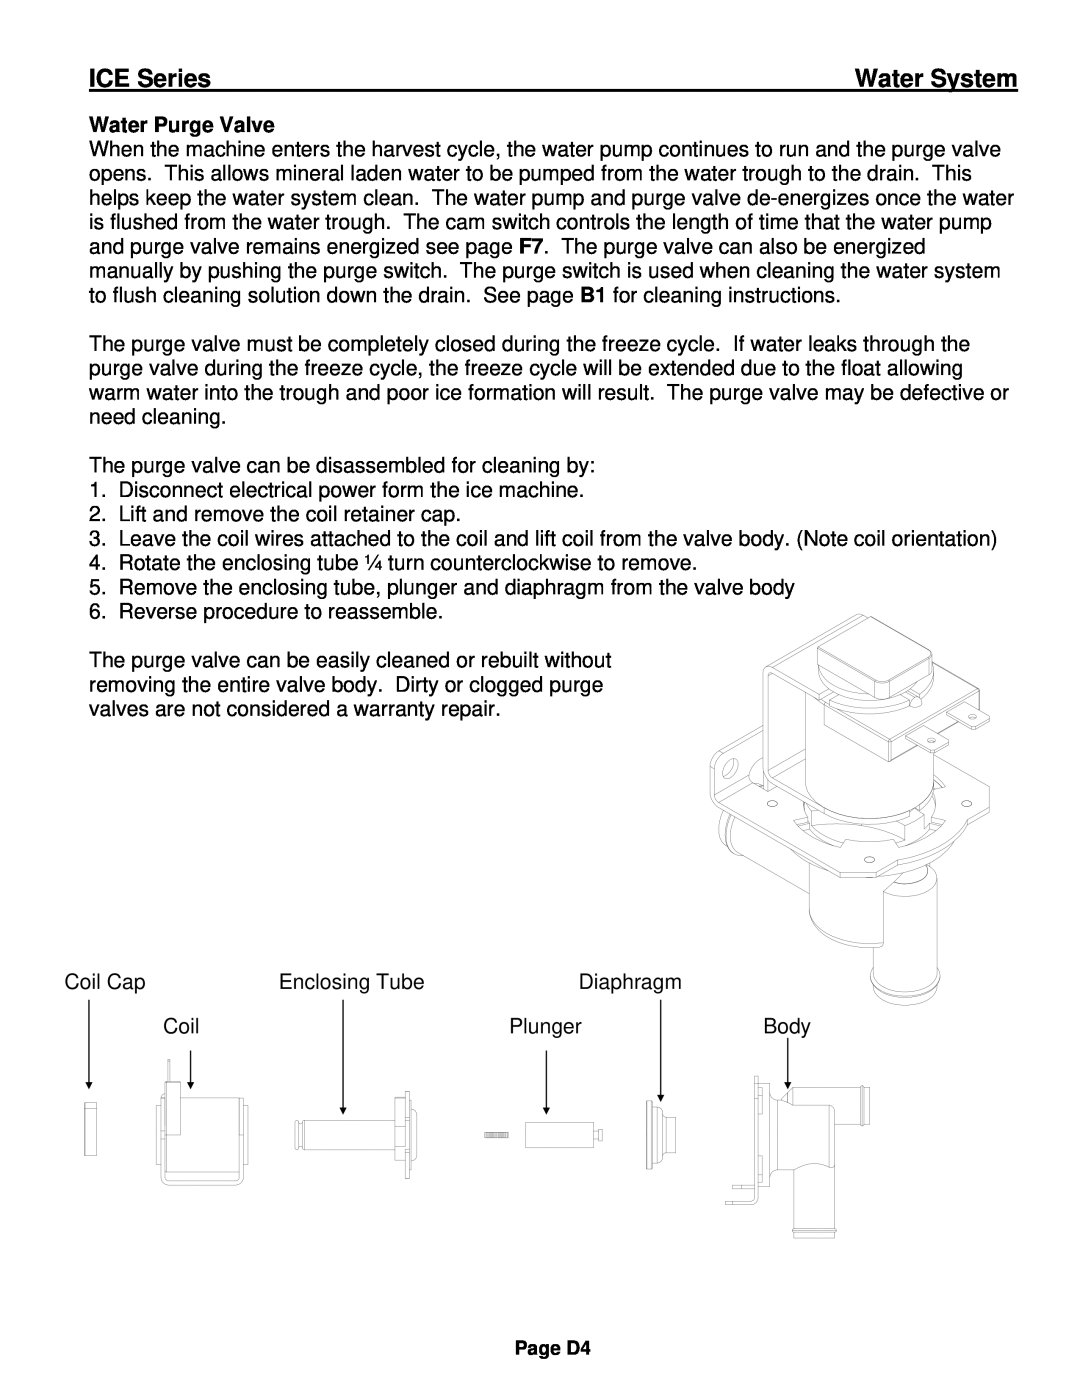 Ice-O-Matic ICE0250 Series installation manual Water Purge Valve, ICE Series, Water System 